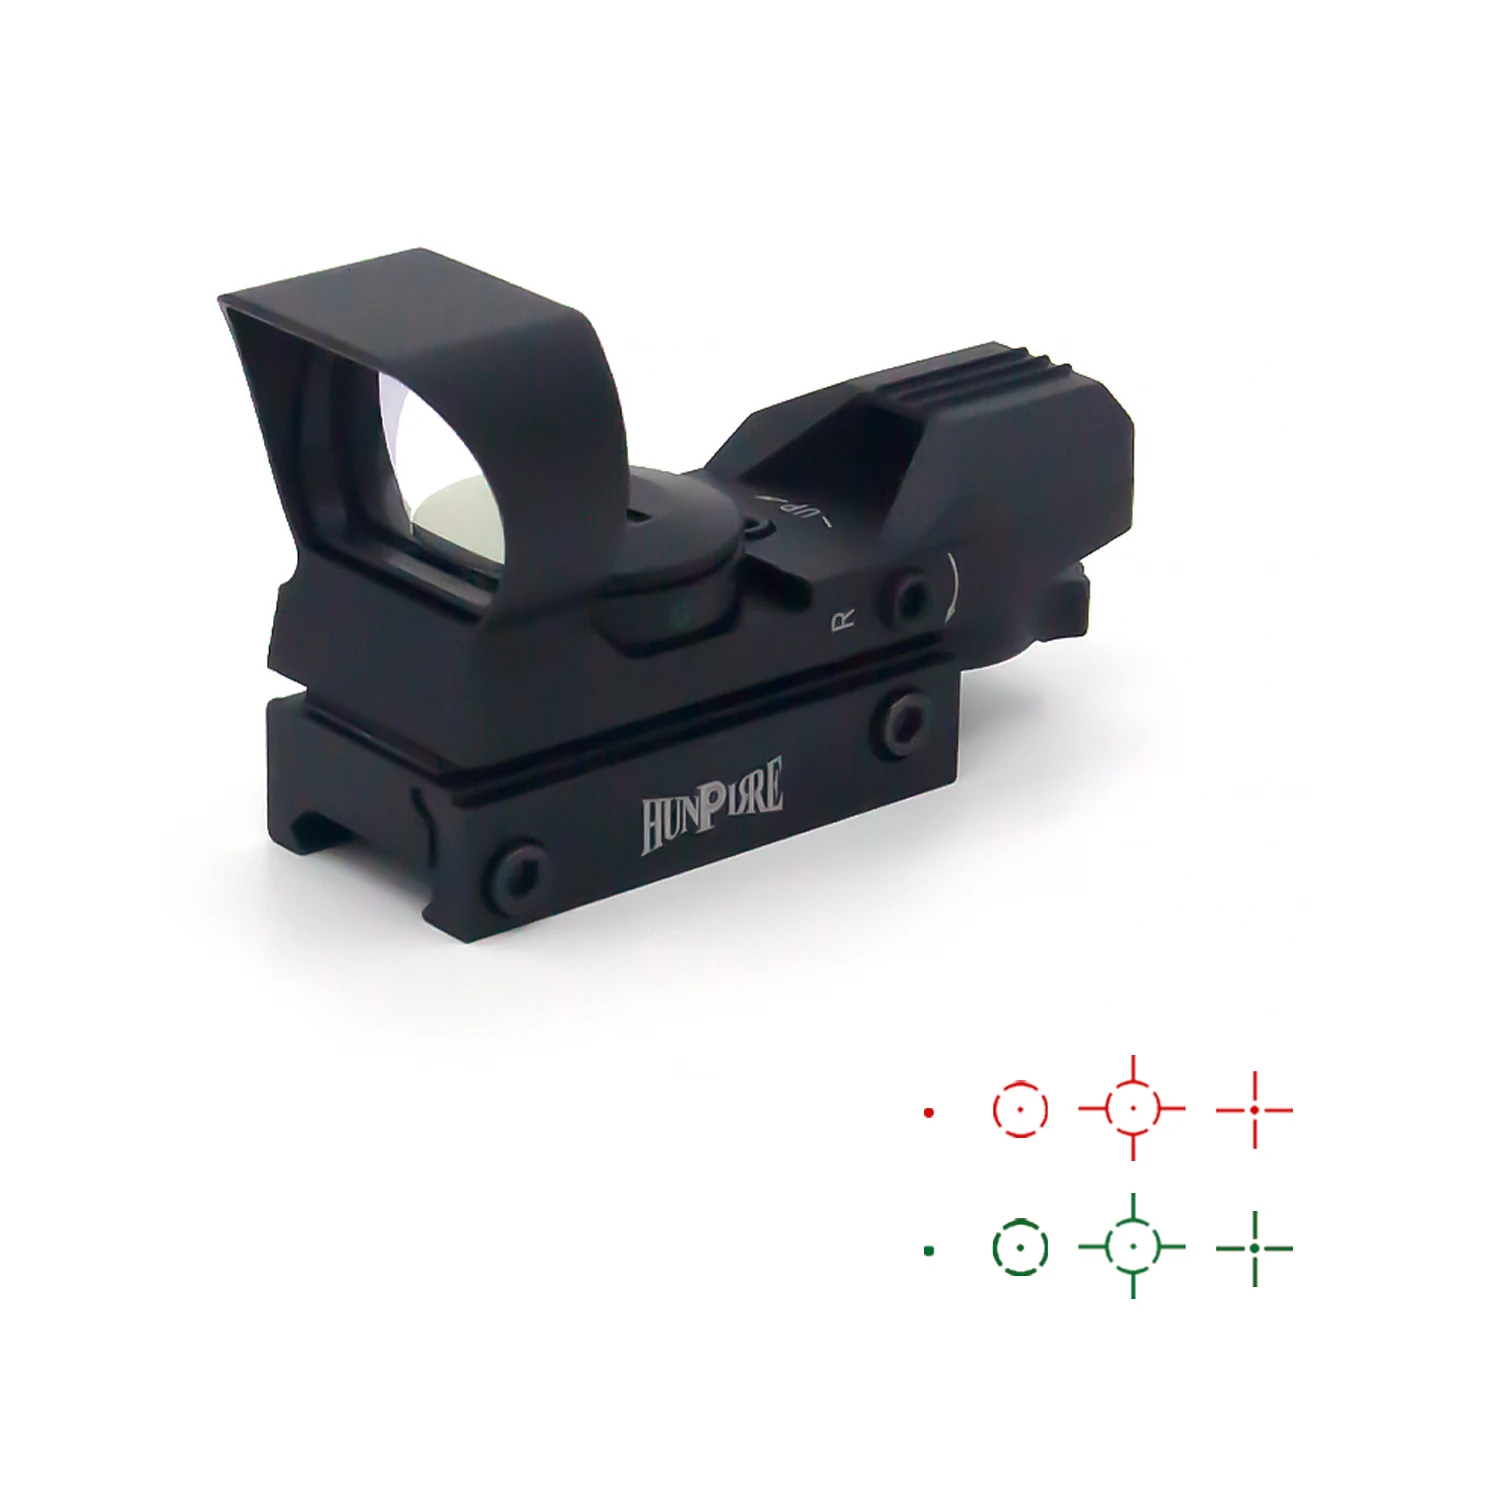 

HUNPIRRE Riflescope 20mm Rail Holographic Red Dot Sight 4 Reticle tactical Scope Collimator Optical sight Hunting Airsoft Optics